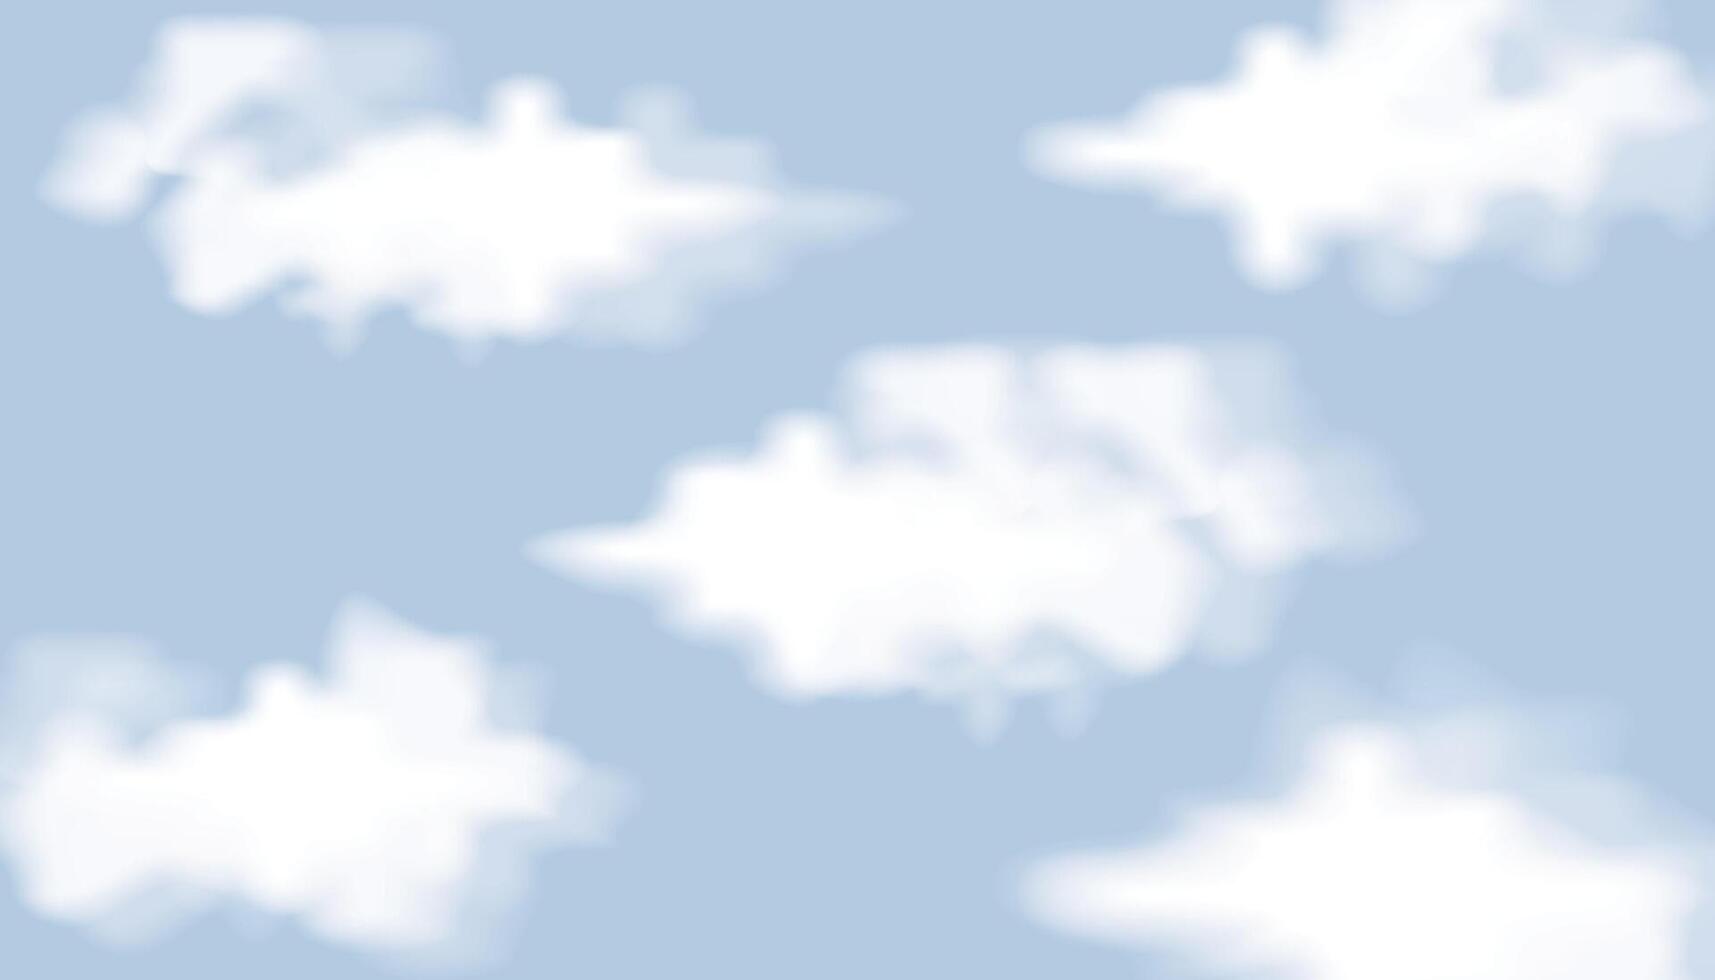 Abstract clouds on a blue-sky background. Vector illustration.